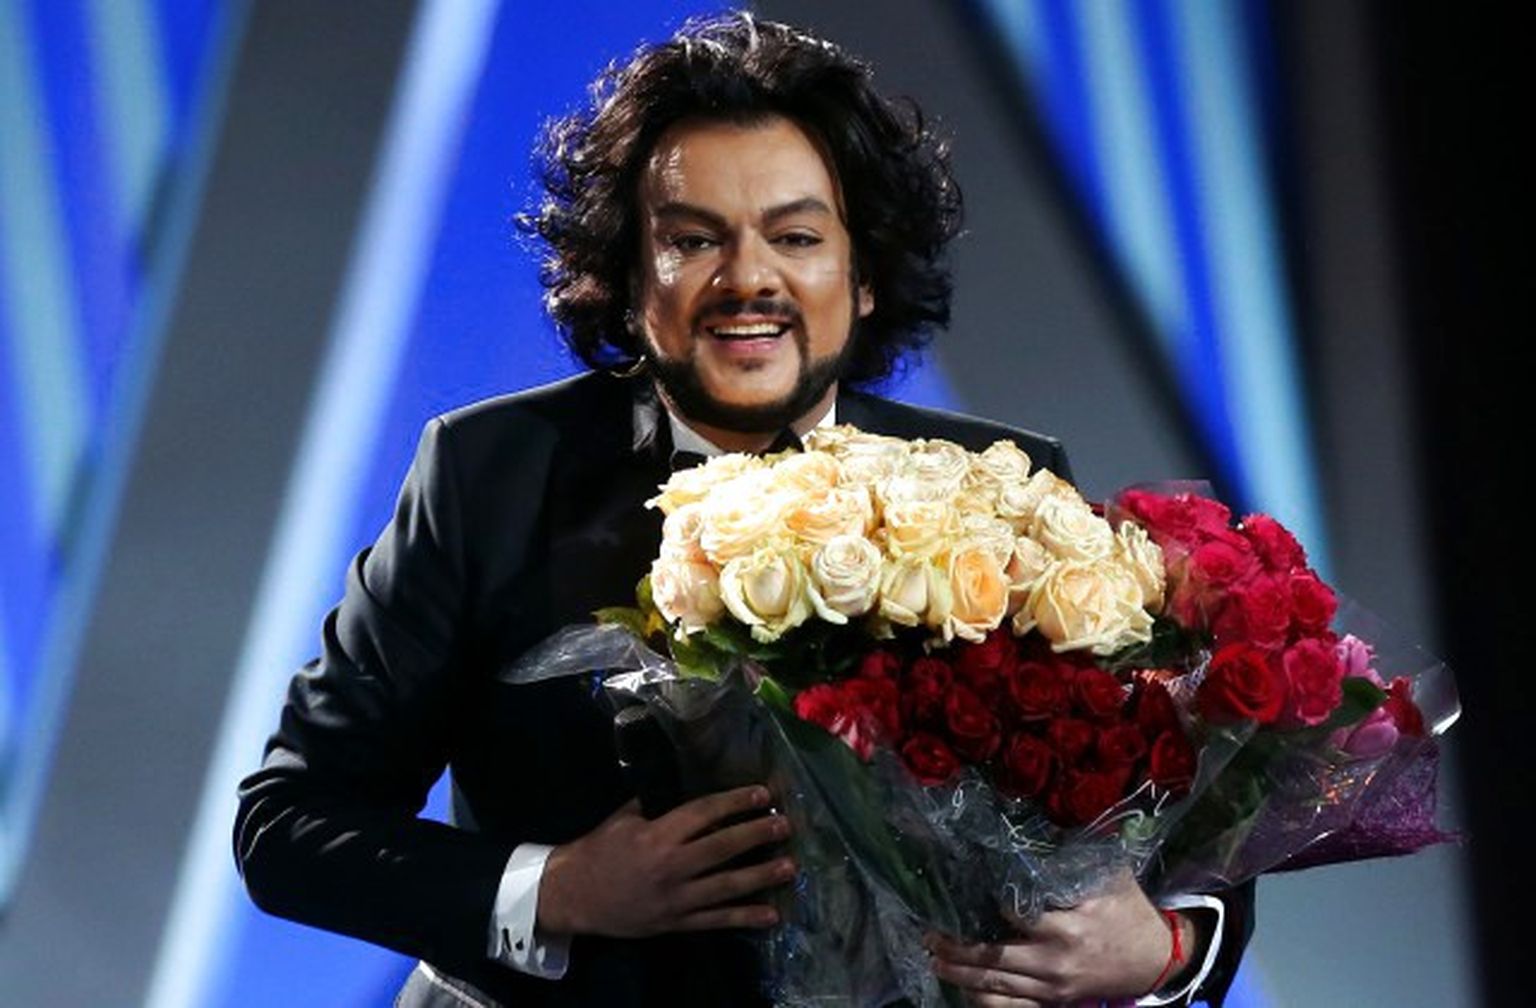 MOSCOW, RUSSIA. MARCH 8, 2015. Singer Filipp Kirkorov with flowers at a fashion show by designer Valentin Yudashkin at the State Kremlin Palace. Sergei Fadeichev/TASS